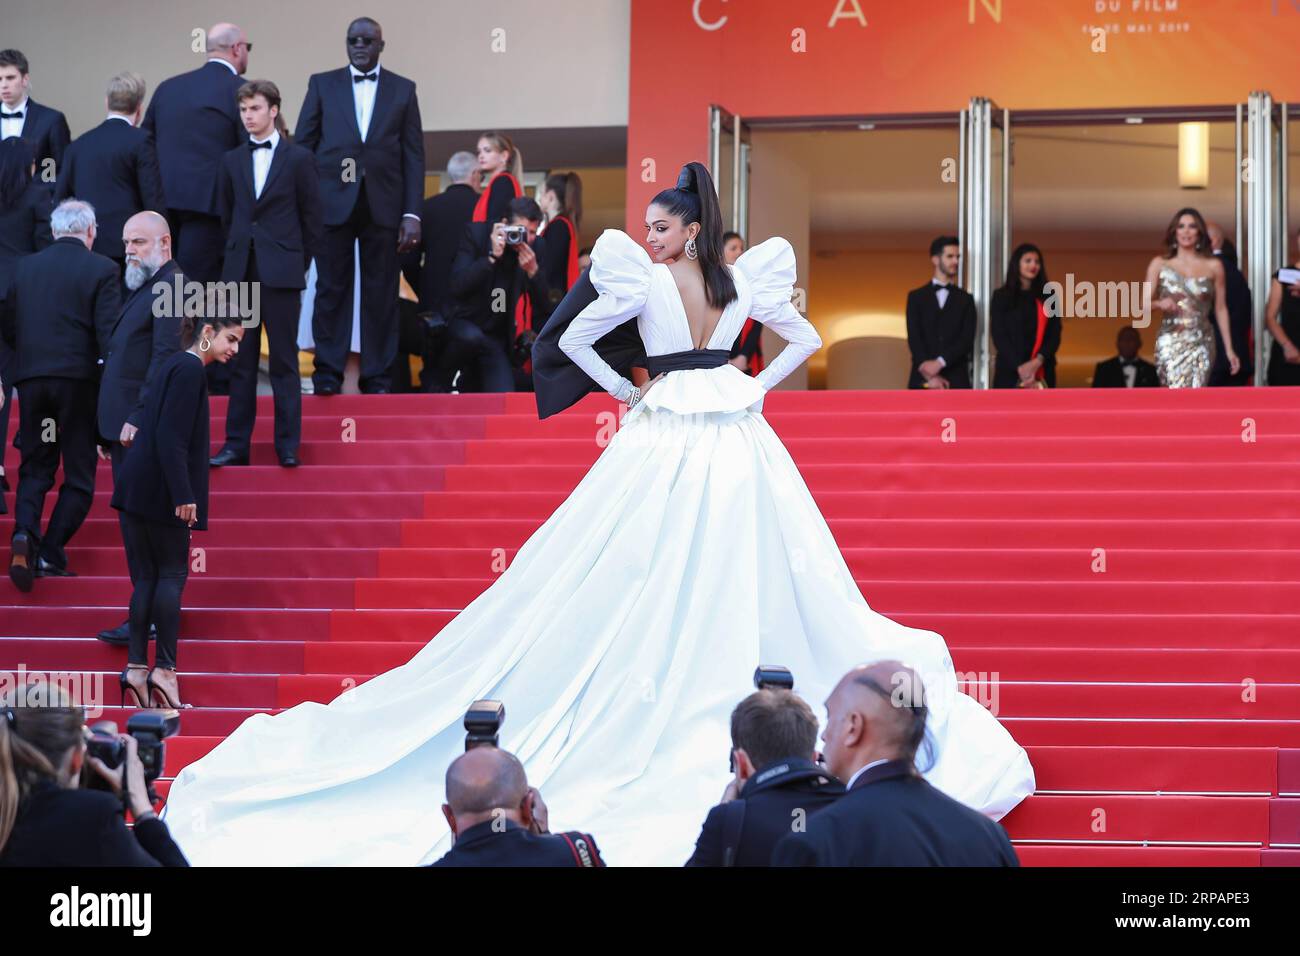 (190517) -- CANNES, May 17, 2019 (Xinhua) -- Actress Deepika Padukone poses on the red carpet for the premiere of the film Rocketman at the 72nd Cannes Film Festival in Cannes, France, on May 16, 2019. The 72nd Cannes Film Festival is held here from May 14 to 25. (Xinhua/Zhang Cheng) FRANCE-CANNES-FILM FESTIVAL-ROCKETMAN-RED CARPET PUBLICATIONxNOTxINxCHN Stock Photo